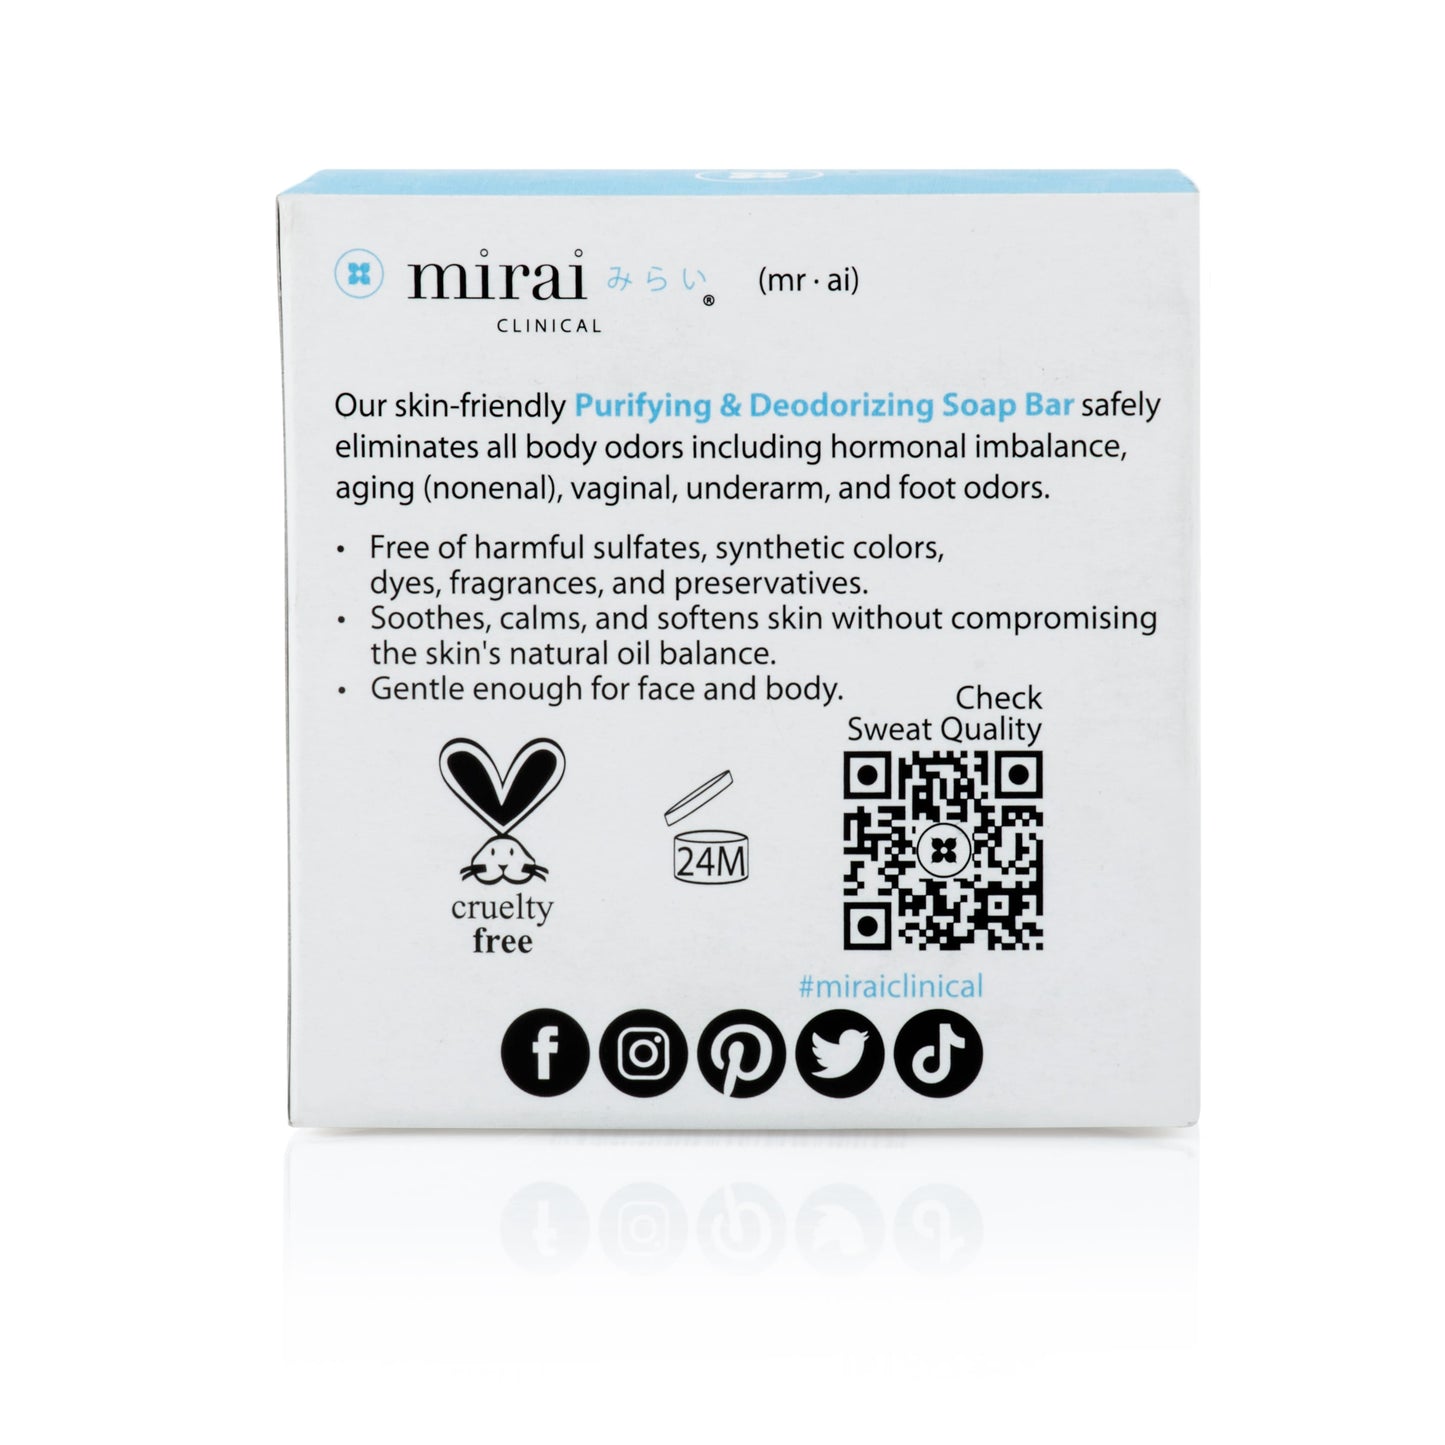 Back view of Mirai Clinical's Deodorizing Soap with Persimmon, detailing ingredients and usage instructions for effective body odor control.